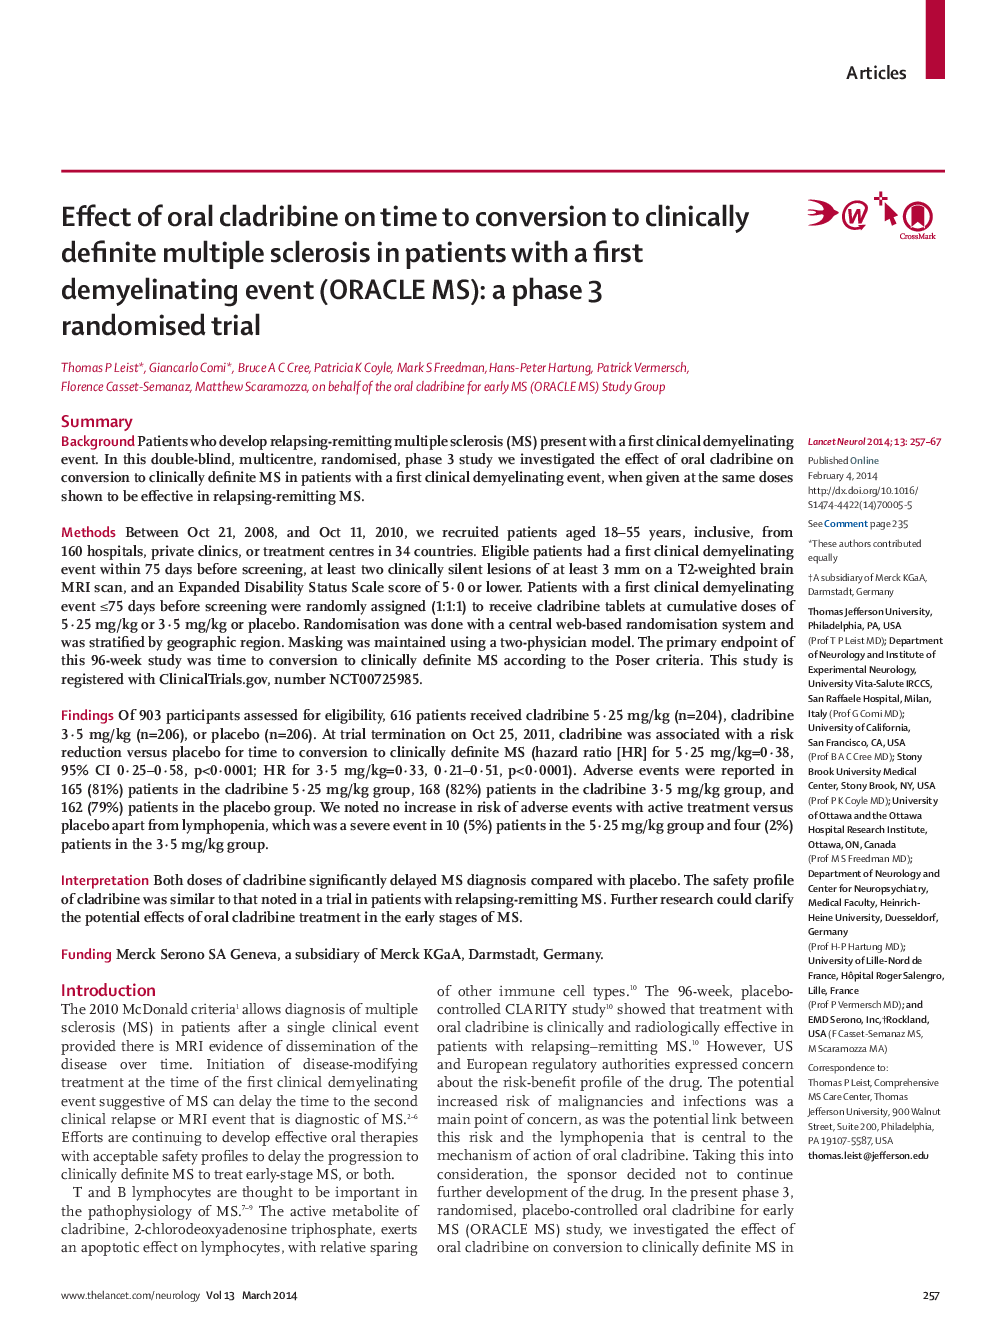 Effect of oral cladribine on time to conversion to clinically definite multiple sclerosis in patients with a first demyelinating event (ORACLE MS): a phase 3 randomised trial